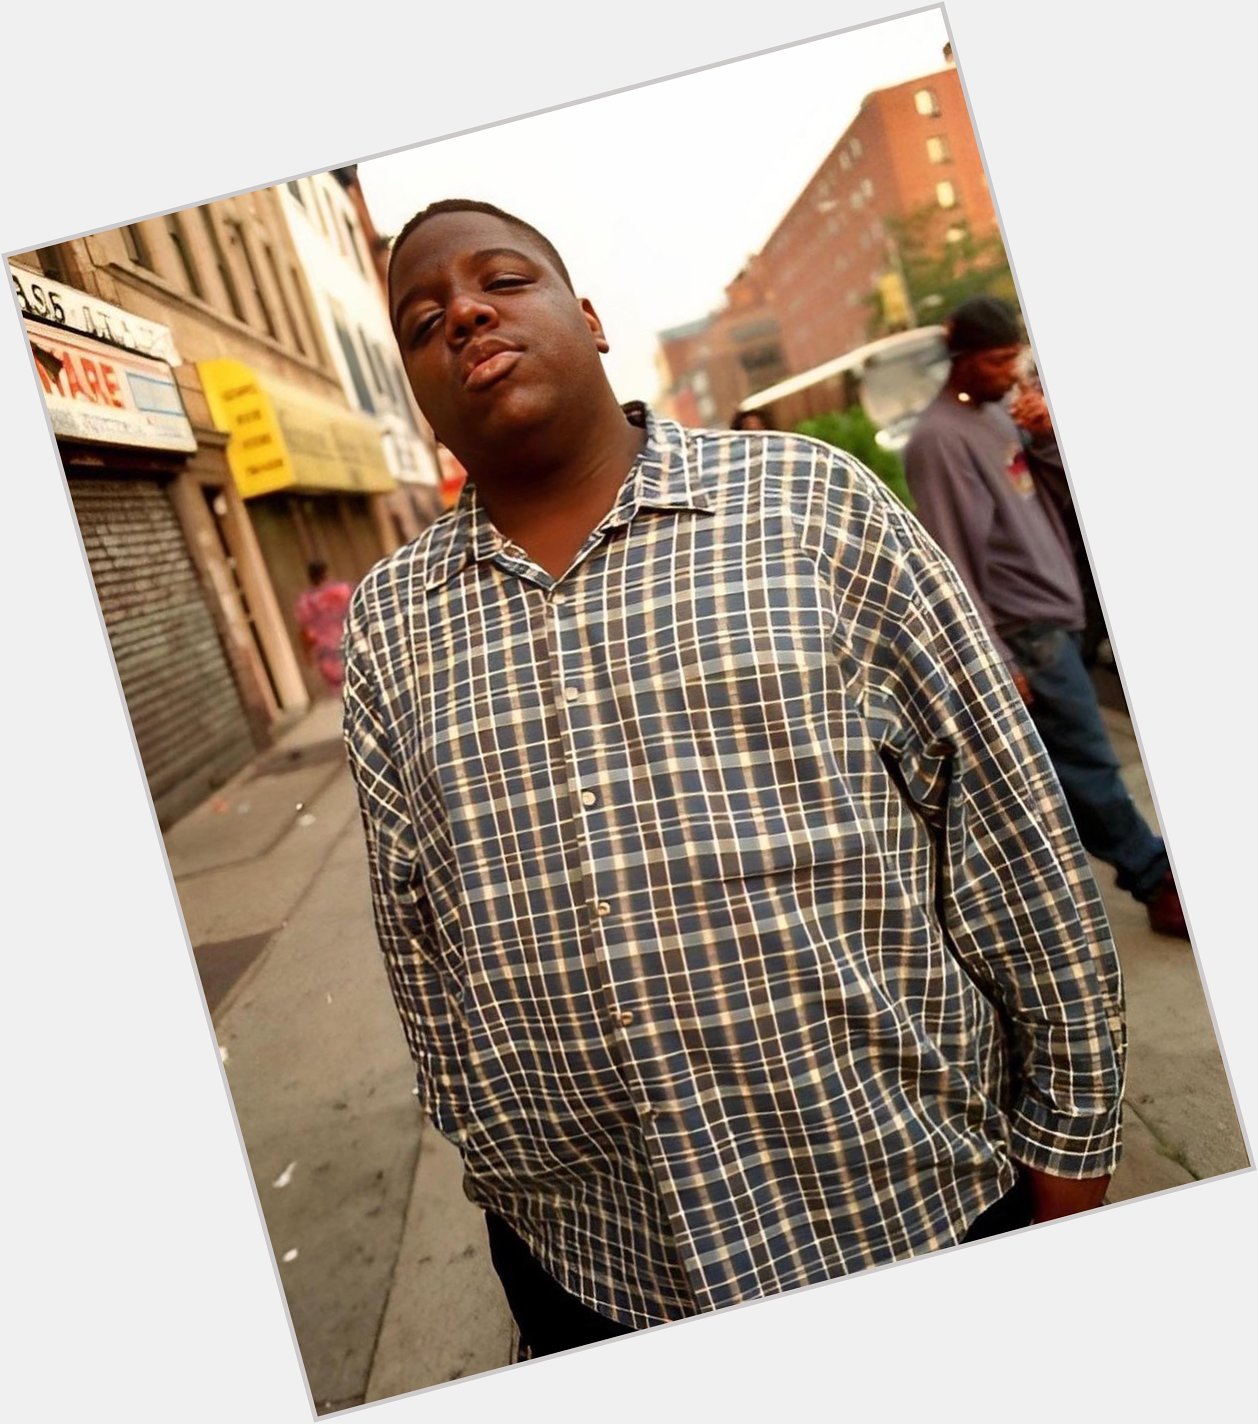 Happy Birthday to the Notorious B.I.G. he would\ve turned 51 today 